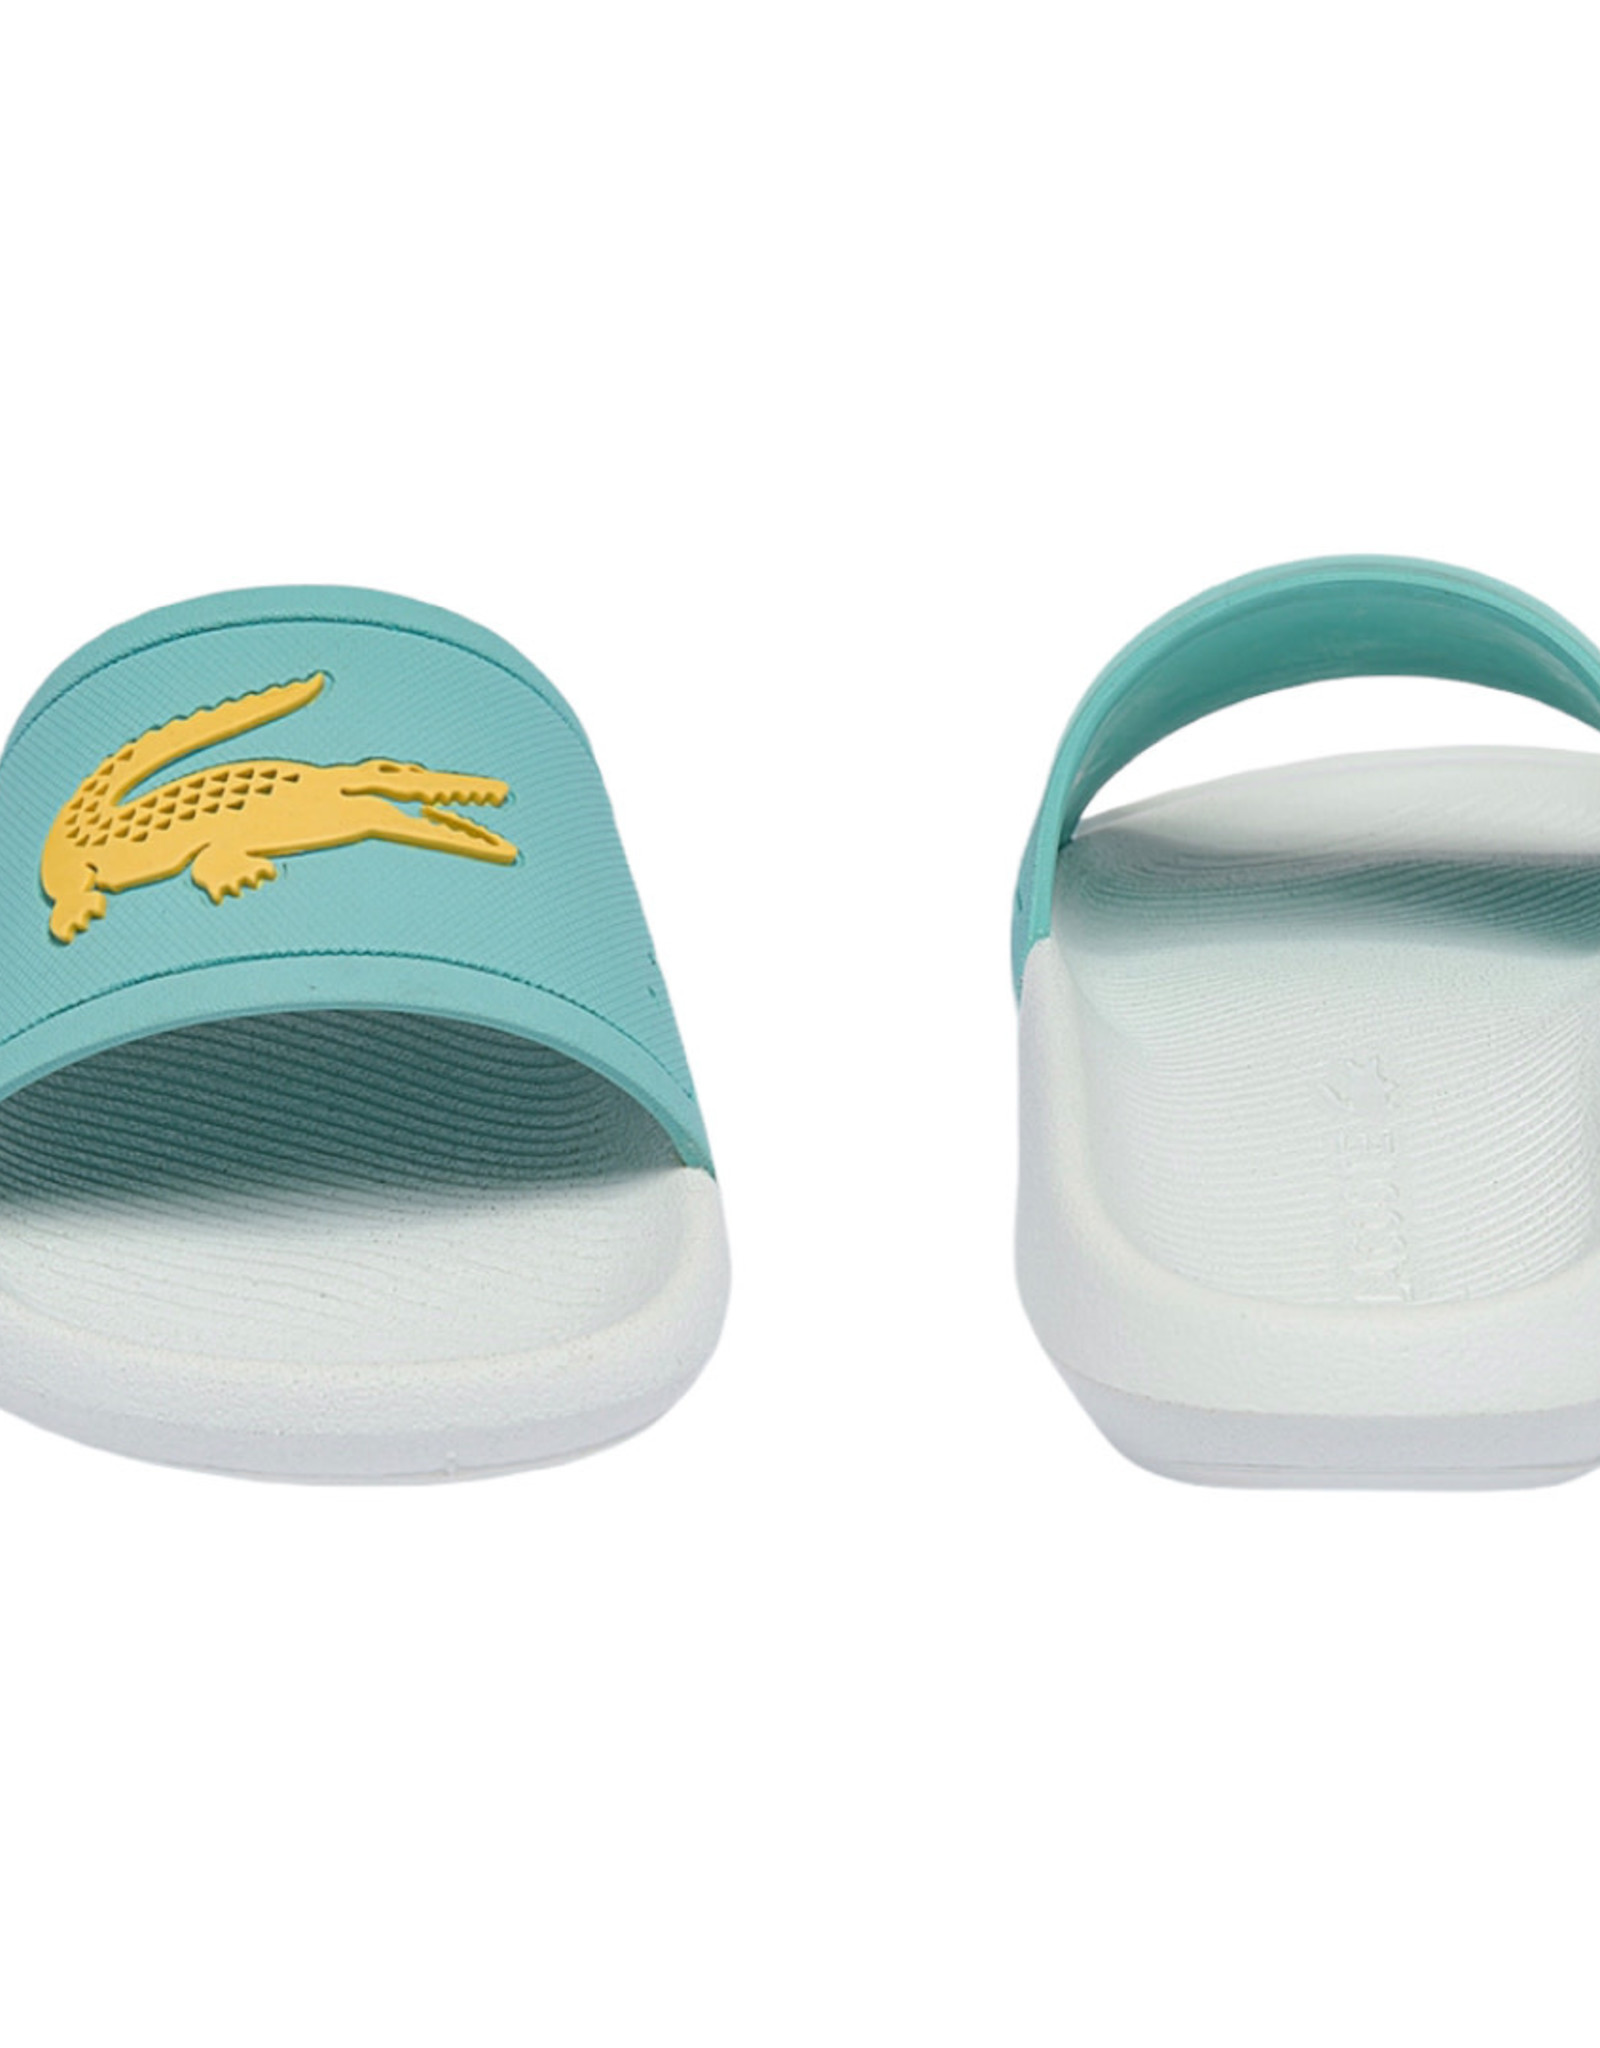 Lacoste Lacoste Slides Croco 2.0 Synthetic Print